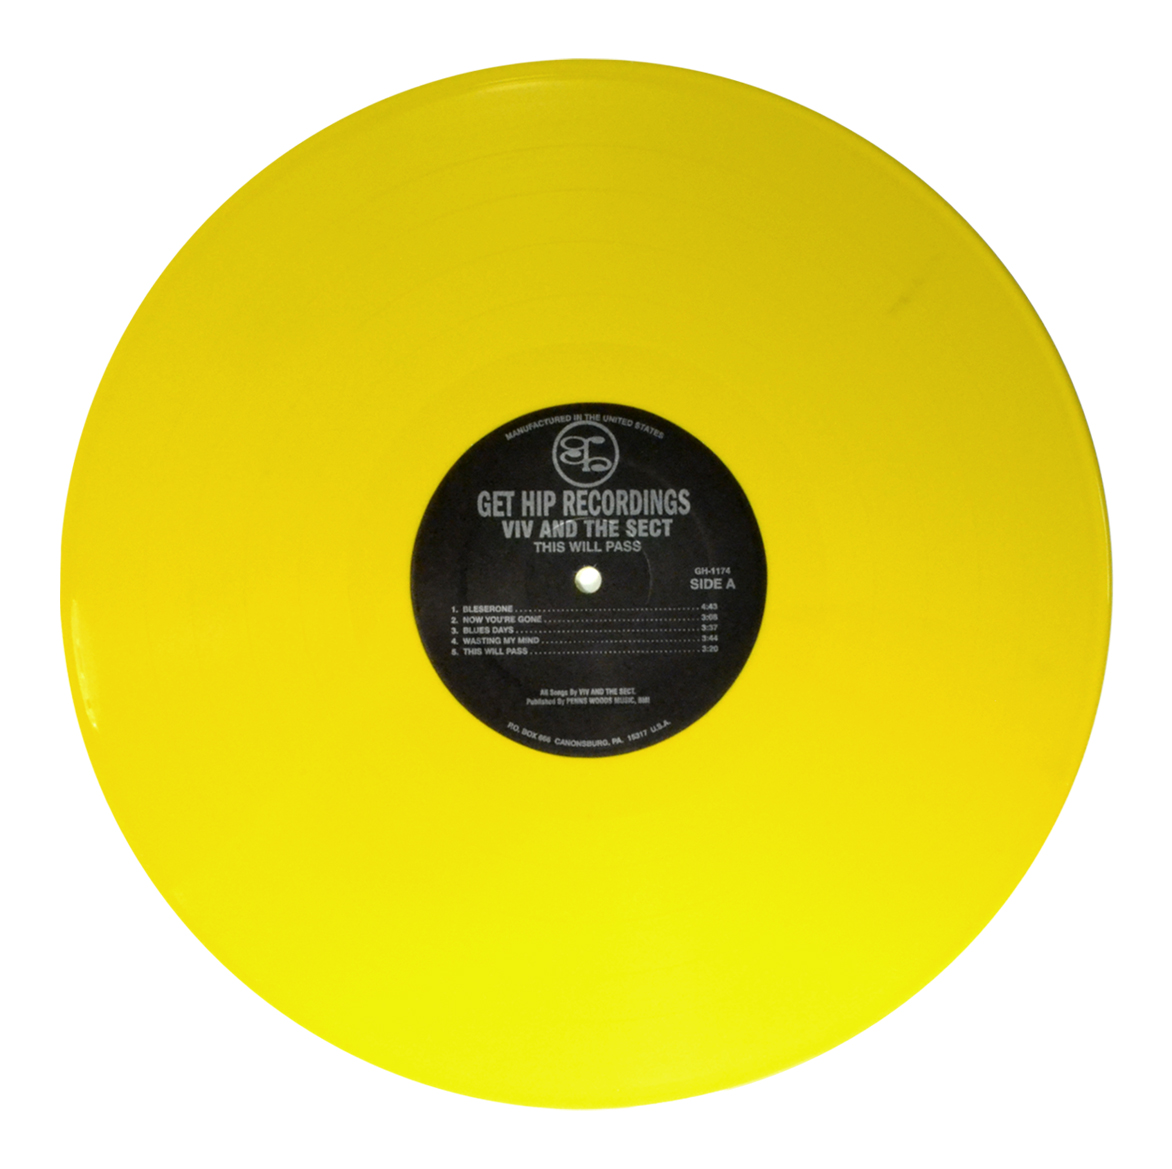 VIV AND THE SECT – THIS WILL PASS – YELLOW VINYL – Get Hip Recordings!